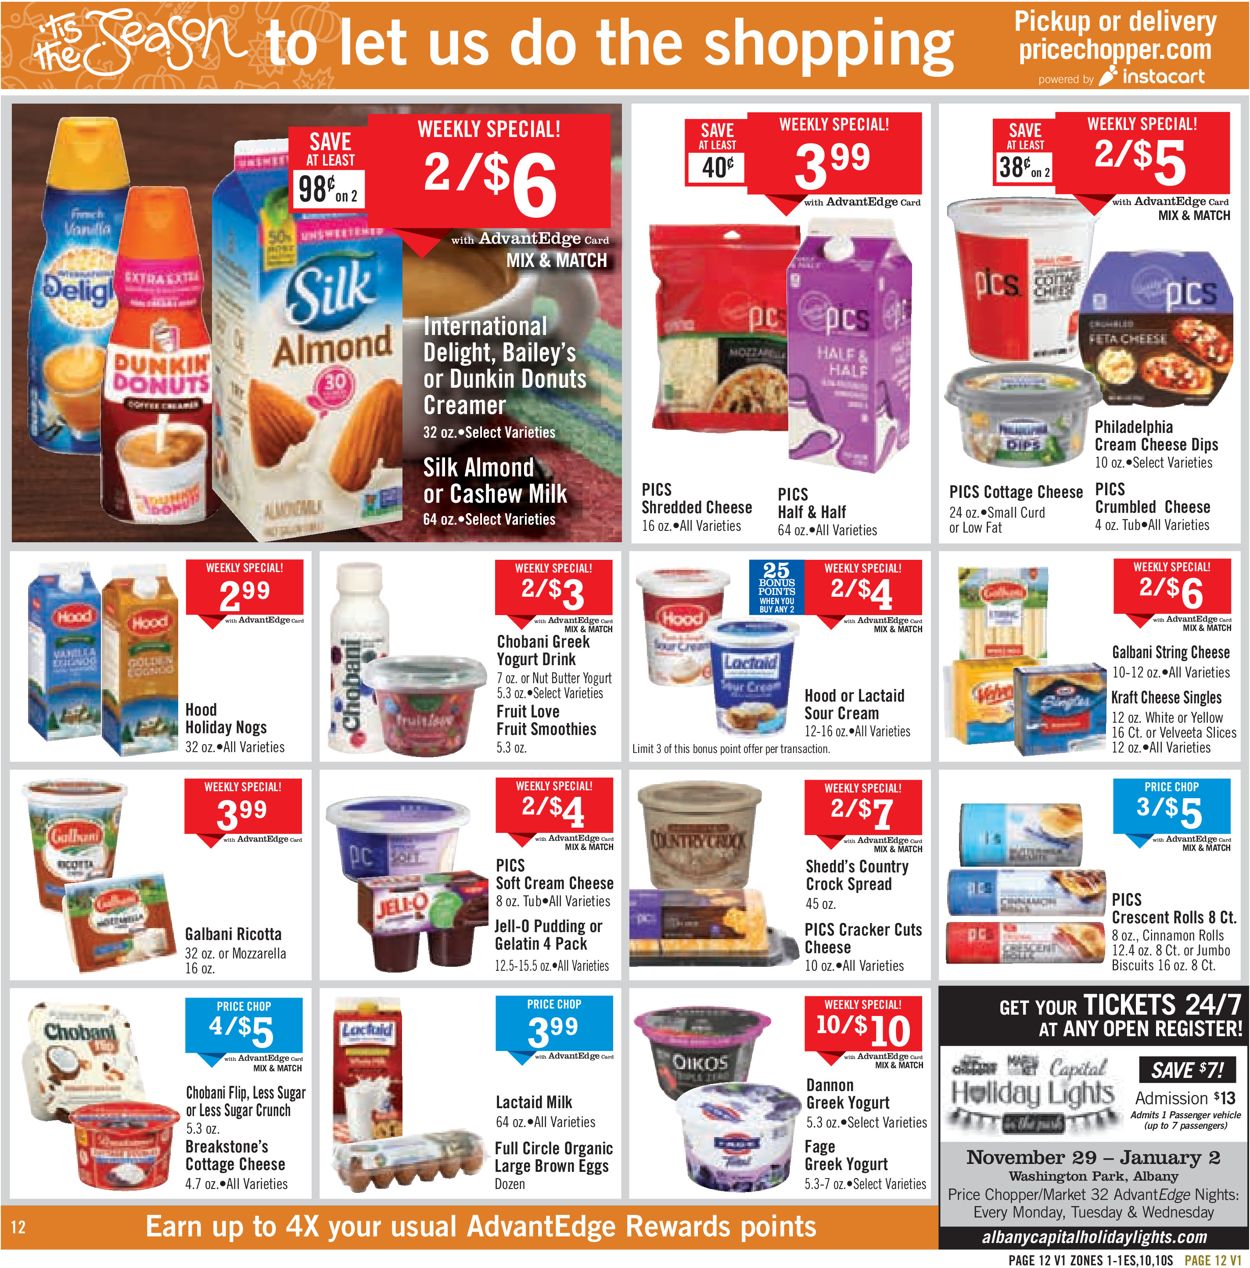 Price Chopper - Thanksgiving Ad 2019 Weekly Ad Circular - valid 11/24-11/30/2019 (Page 16)